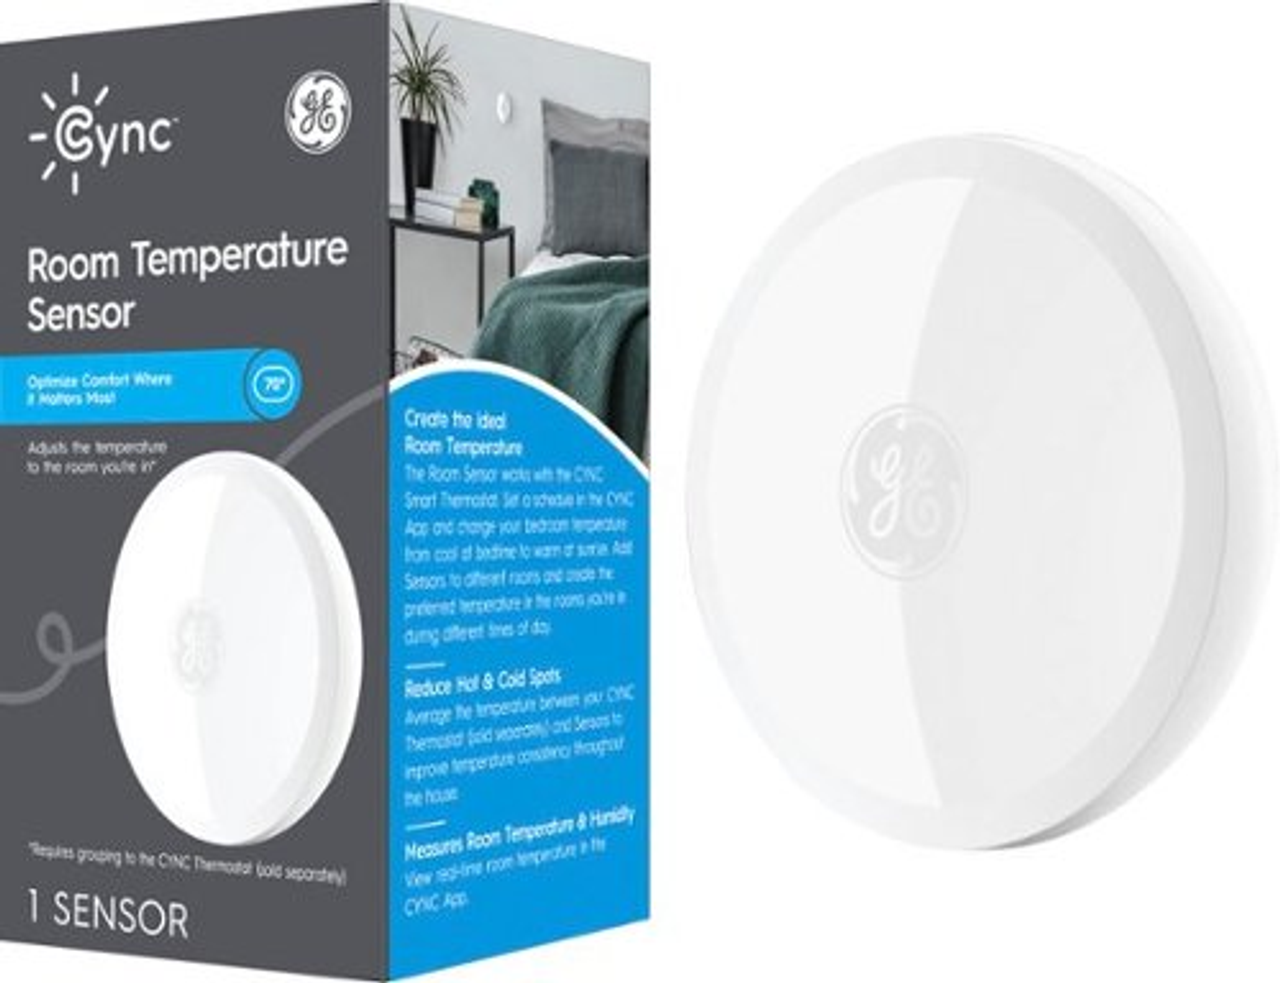 GE CYNC Room Temperature Sensor, Pairs with the CYNC Smart Thermostat (sold separately), White - White